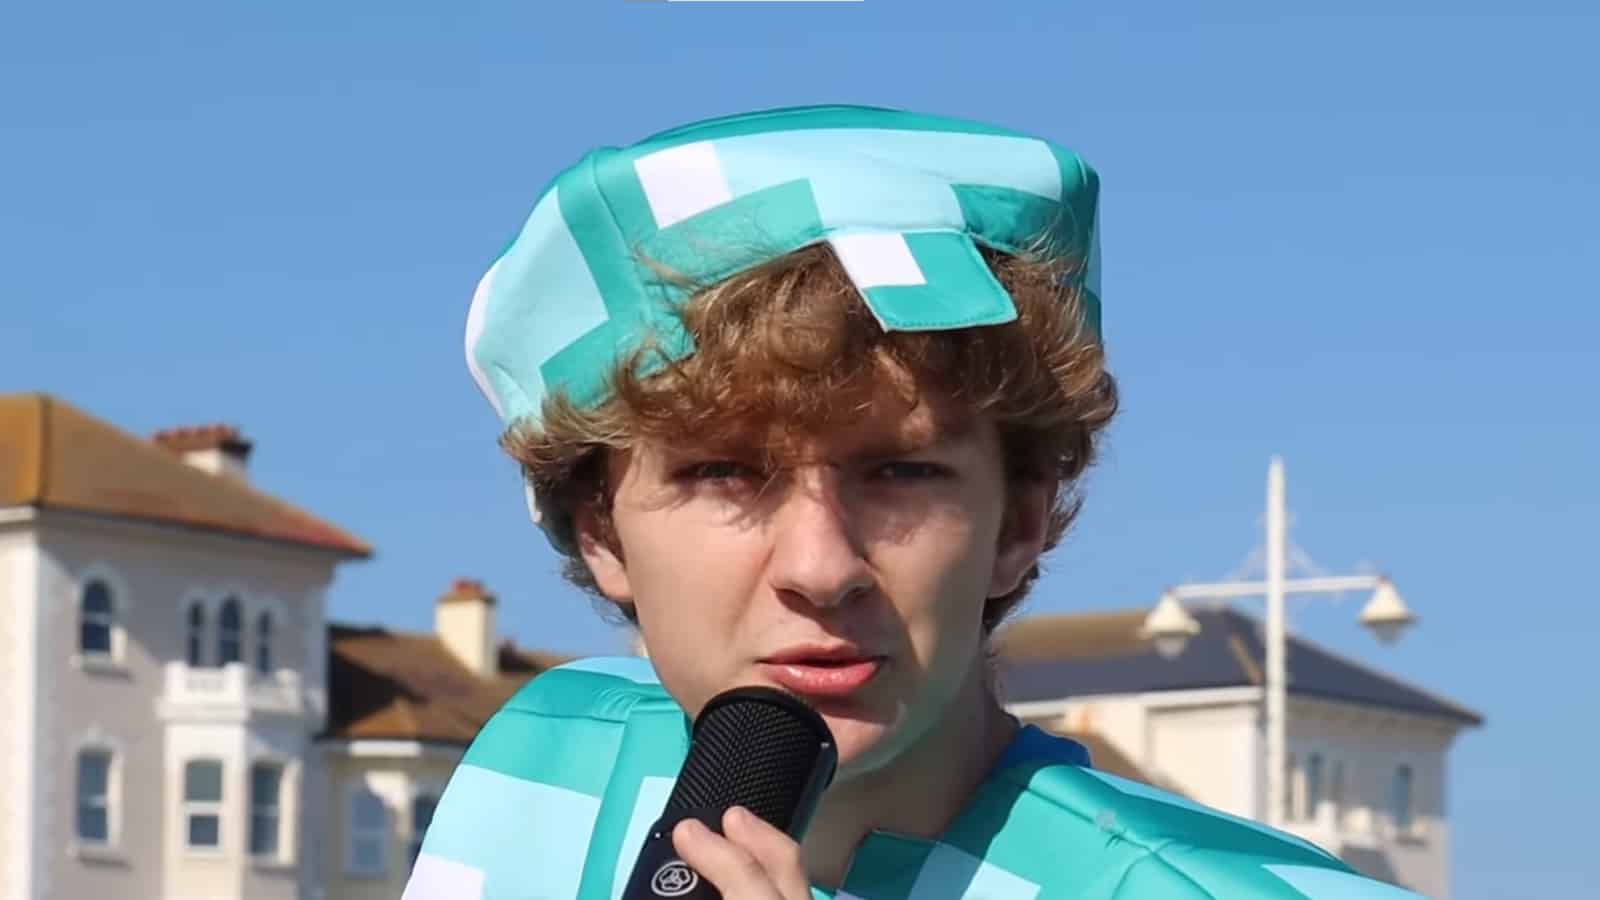 Dream face reveal: Largest Minecraft content creator finally reveals face  to millions - Dexerto